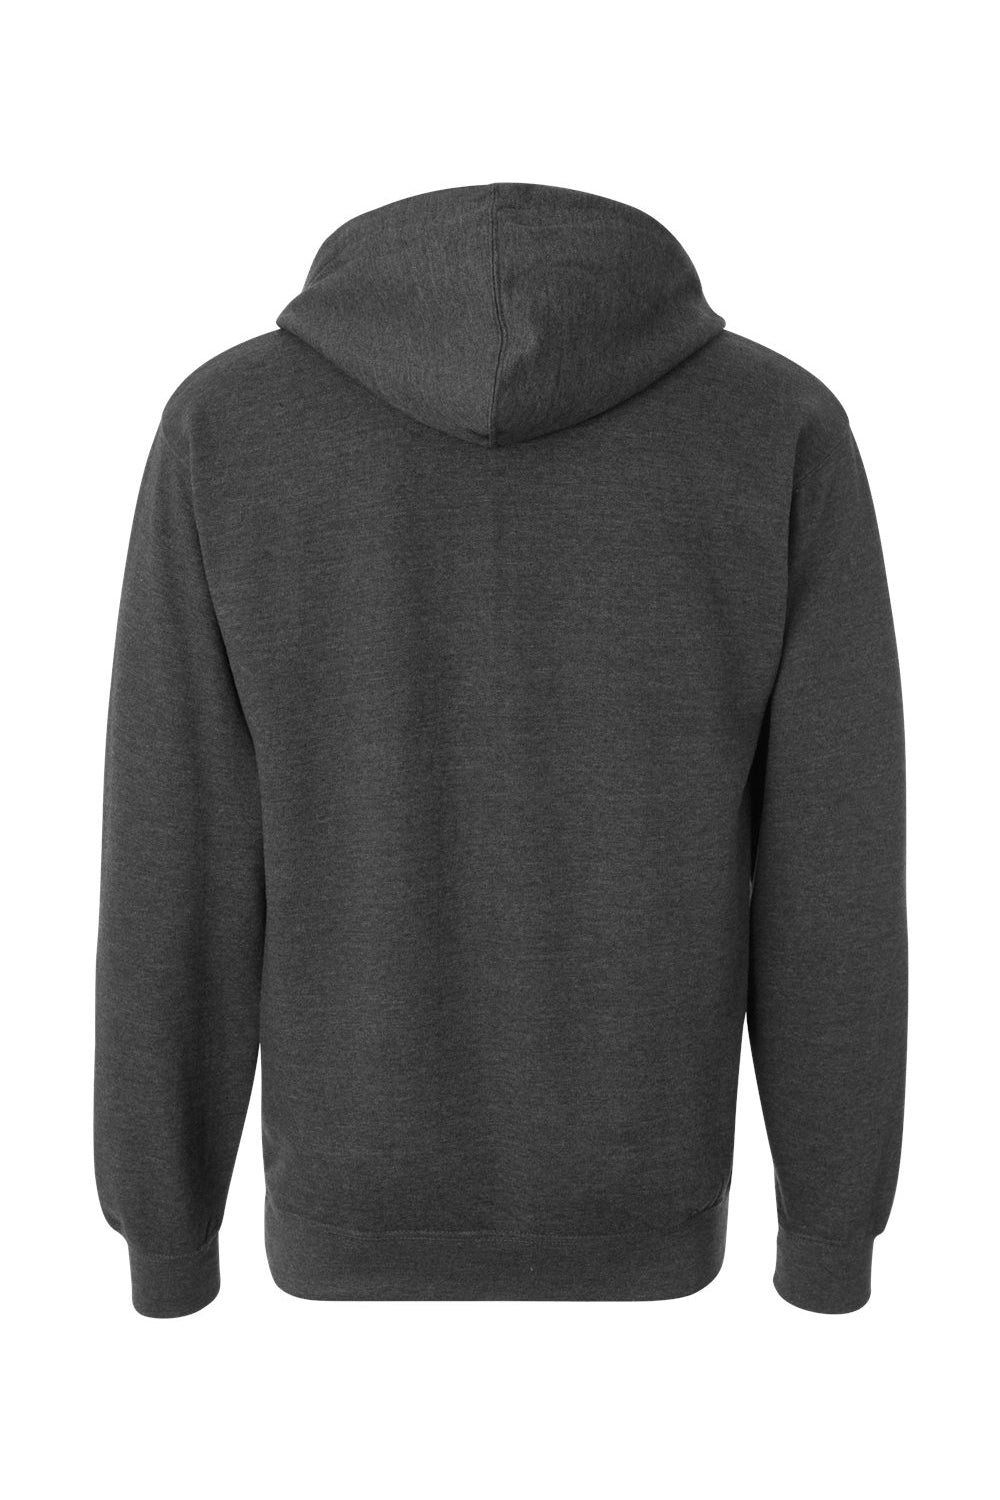 Independent Trading Co. SS4500 Mens Hooded Sweatshirt Hoodie Heather Charcoal Grey Flat Back